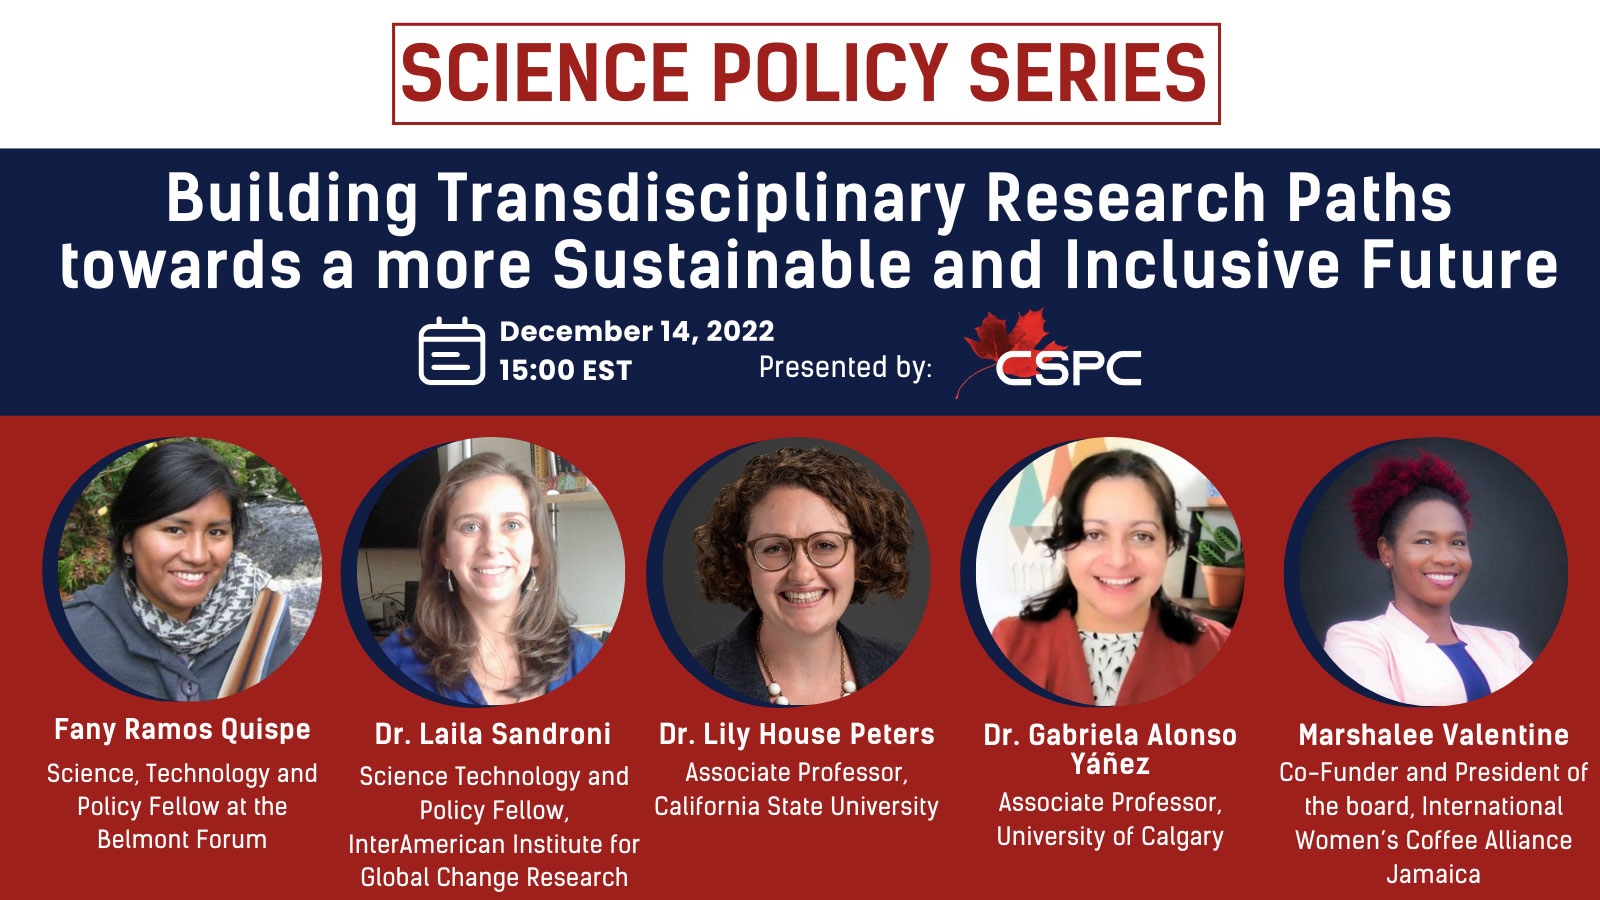 Banner for "Building Transdisciplinary Research Paths towards a more Sustainable and Inclusive Future" event